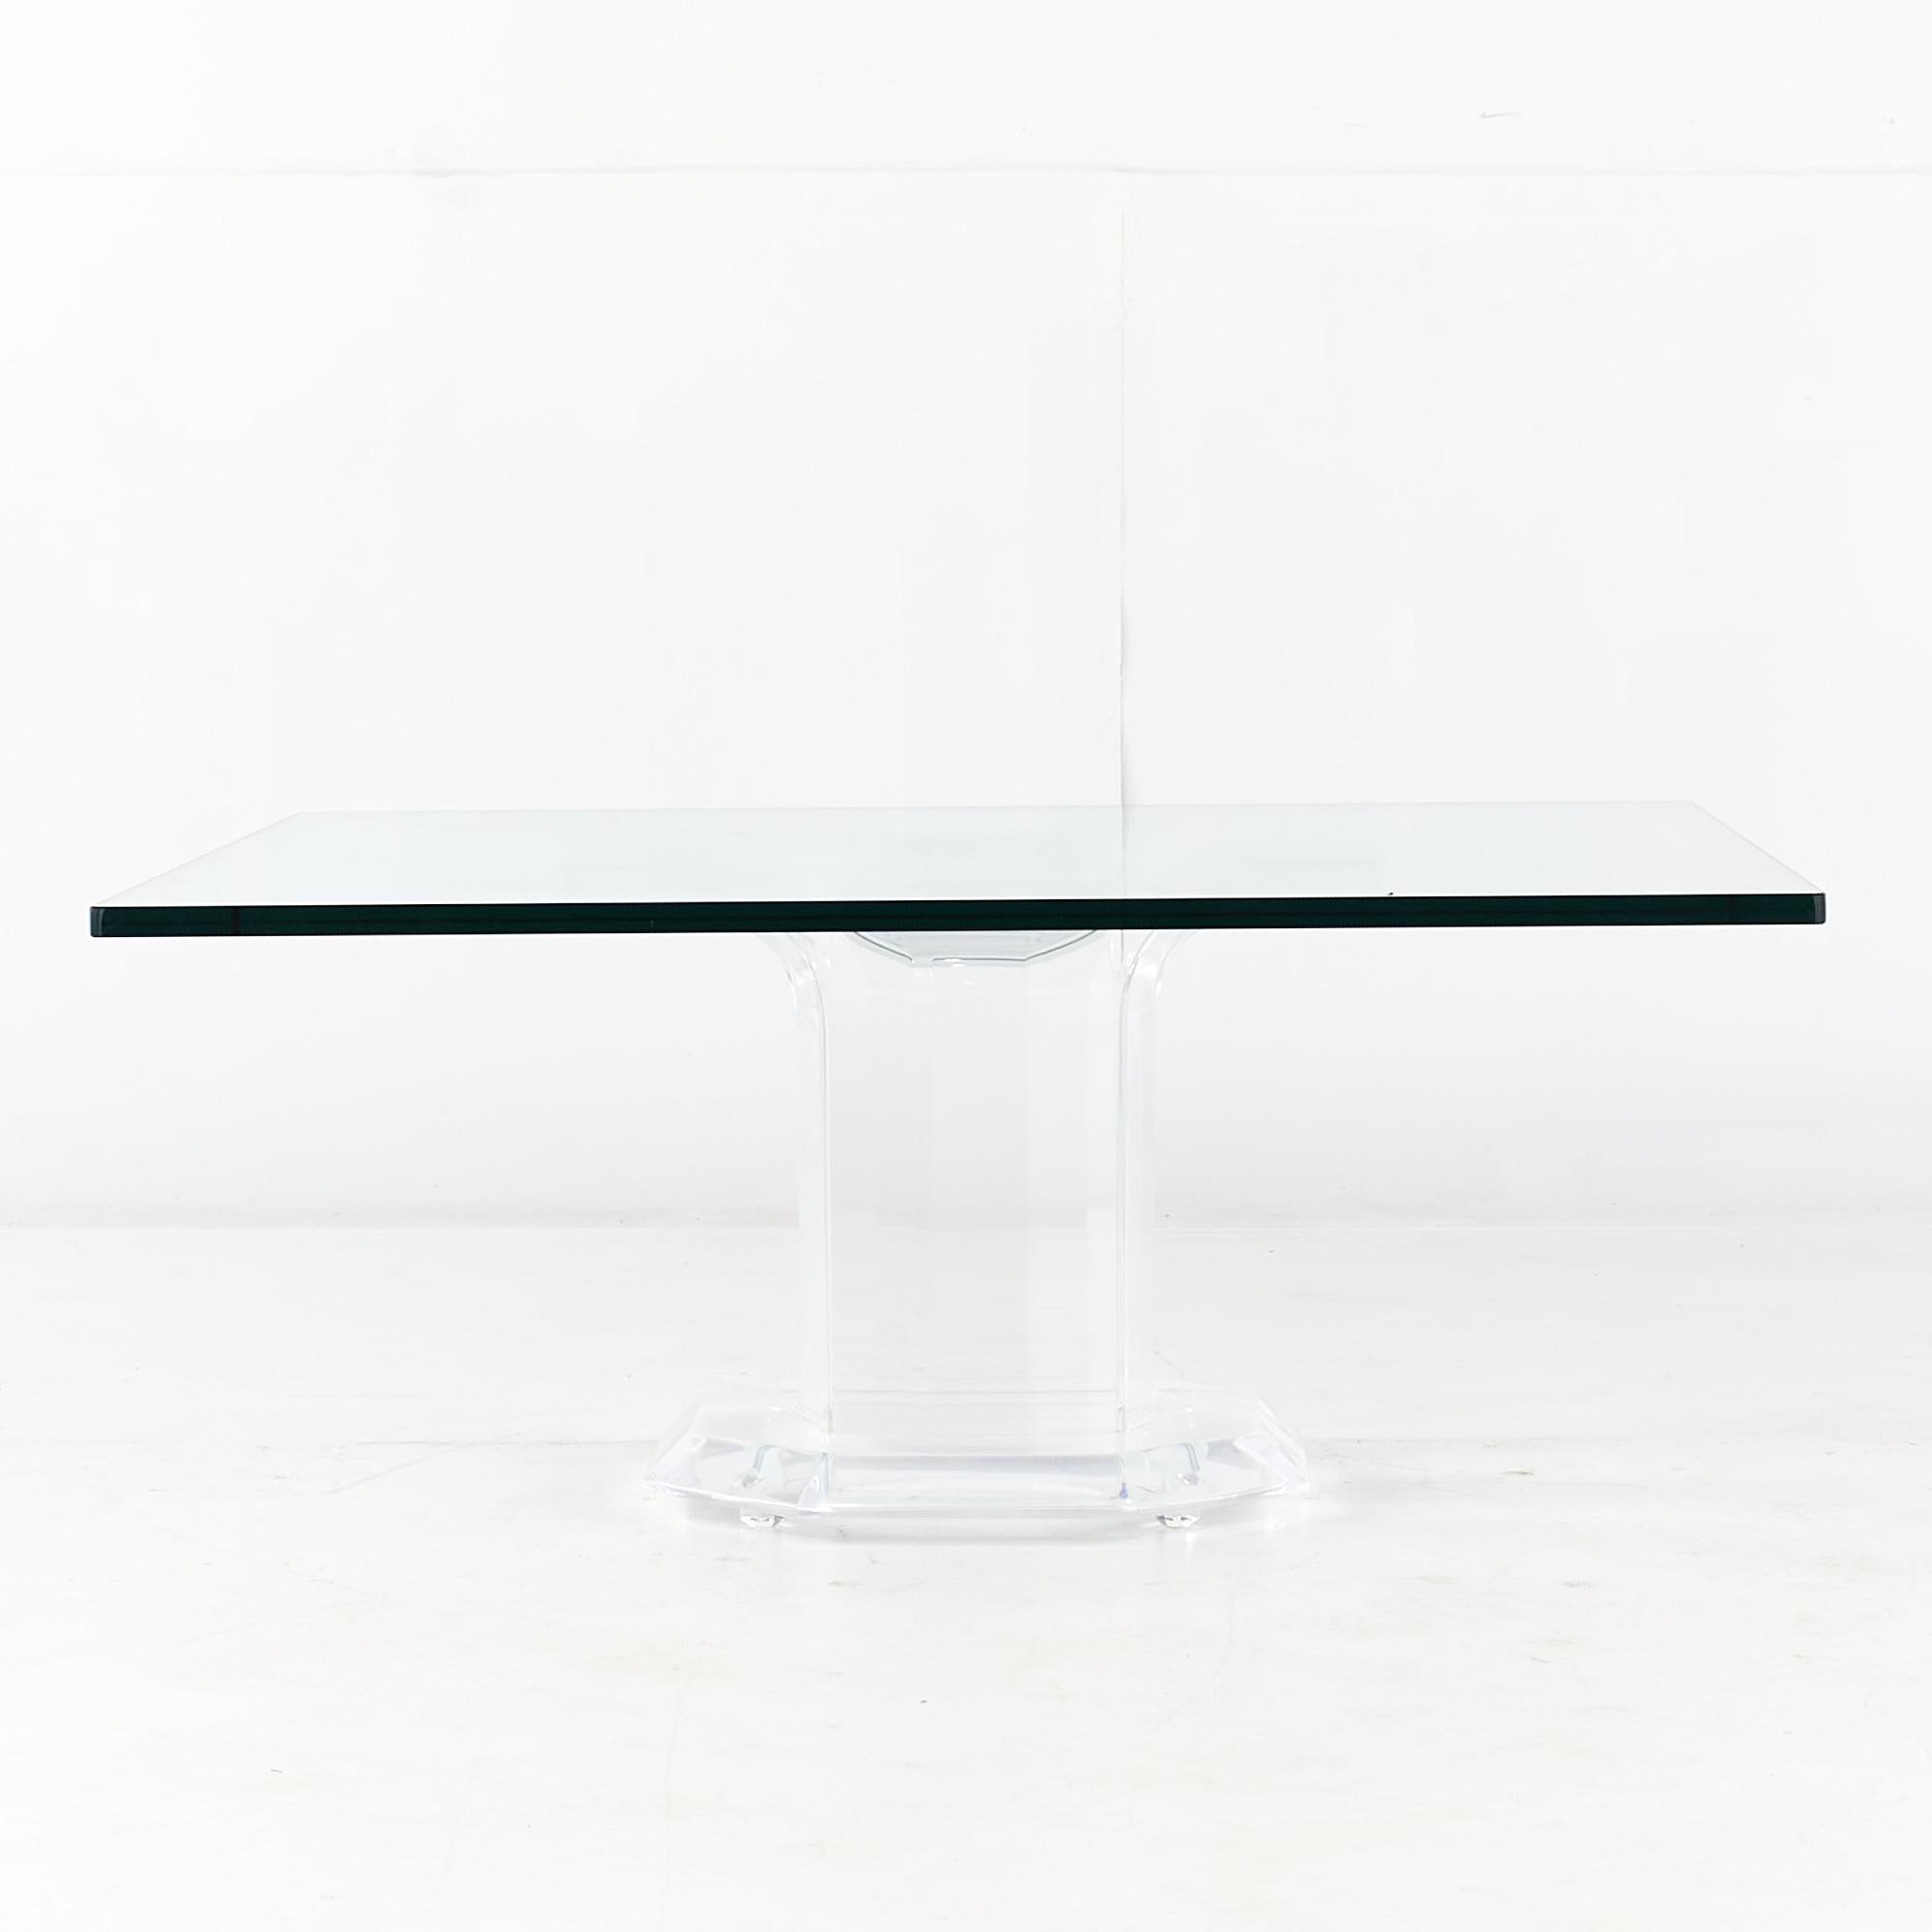 Mid Century Lucite and glass square coffee table.

This table measures: 40 wide x 40 deep x 17 inches high.

All pieces of furniture can be had in what we call restored vintage condition. That means the piece is restored upon purchase so it’s